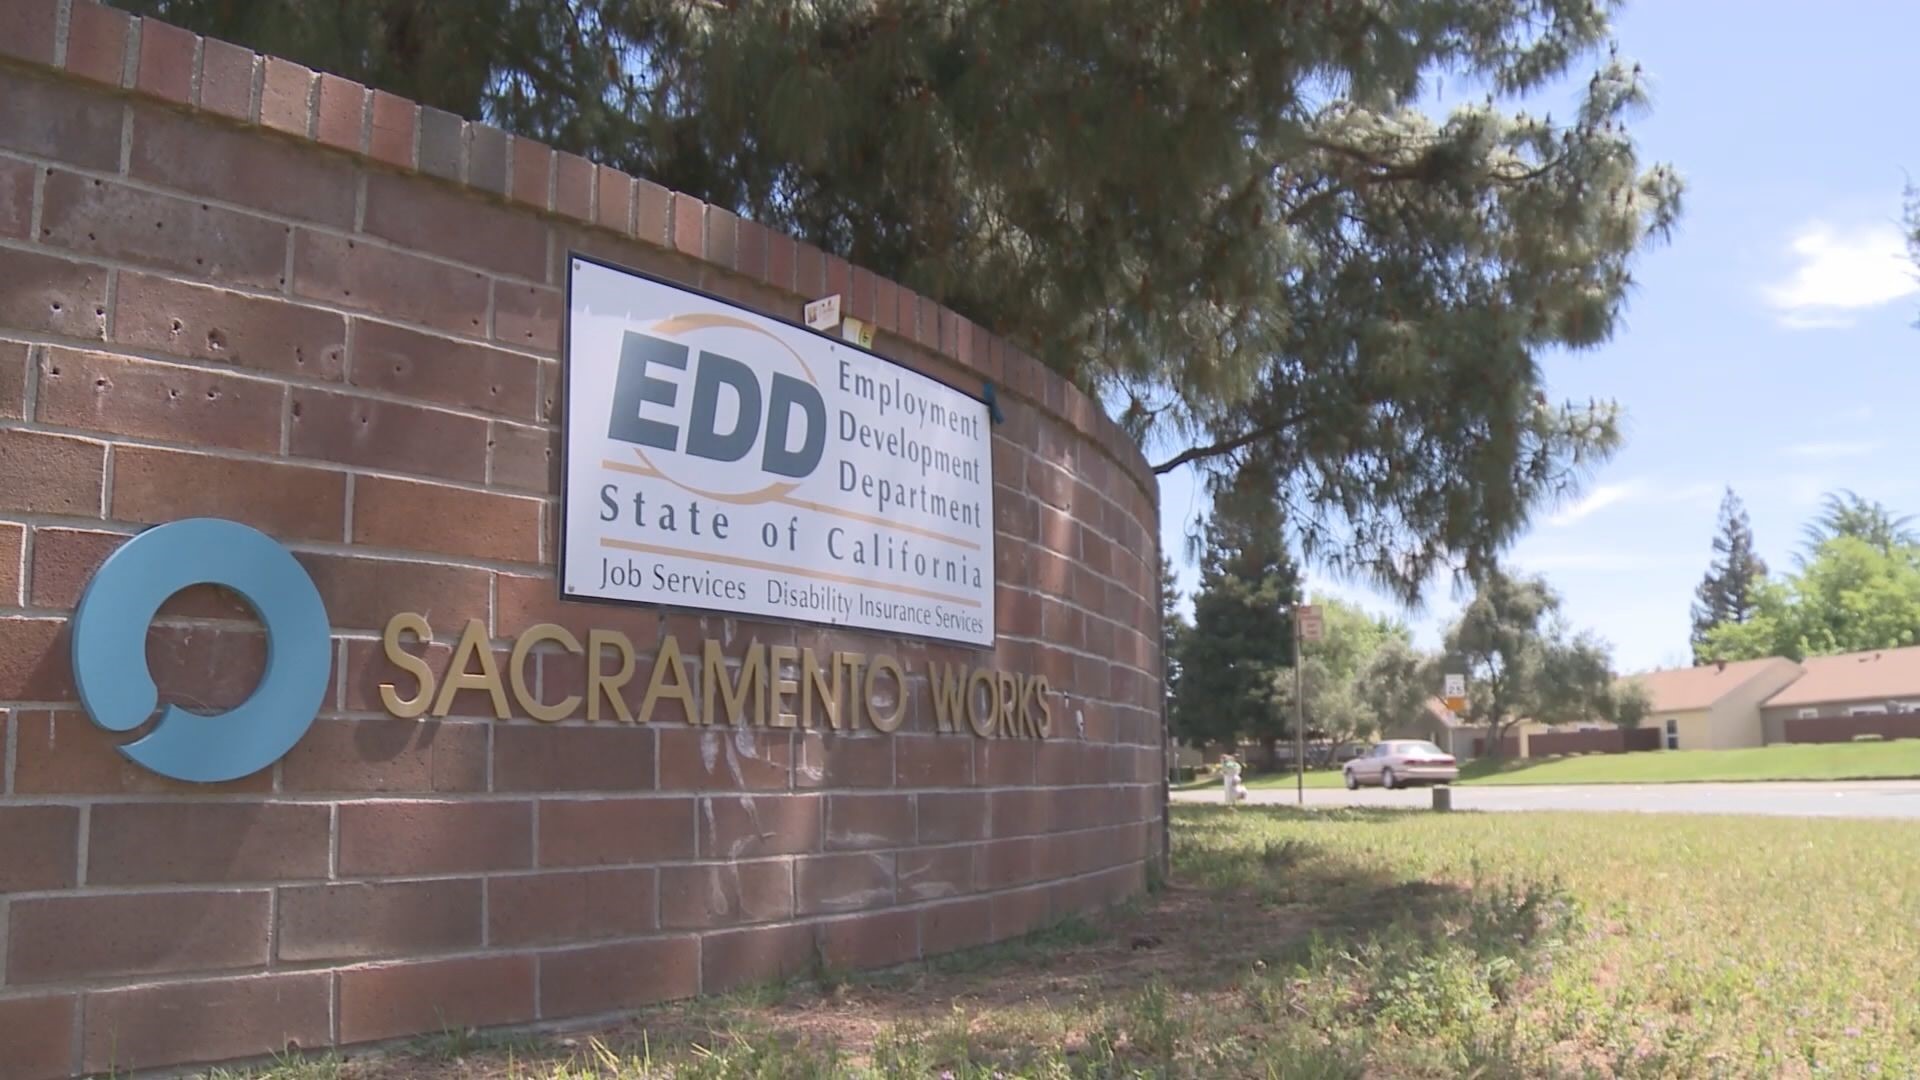 Many Californians are asking how they could access their unemployment benefits after EDD cut them off overnight.